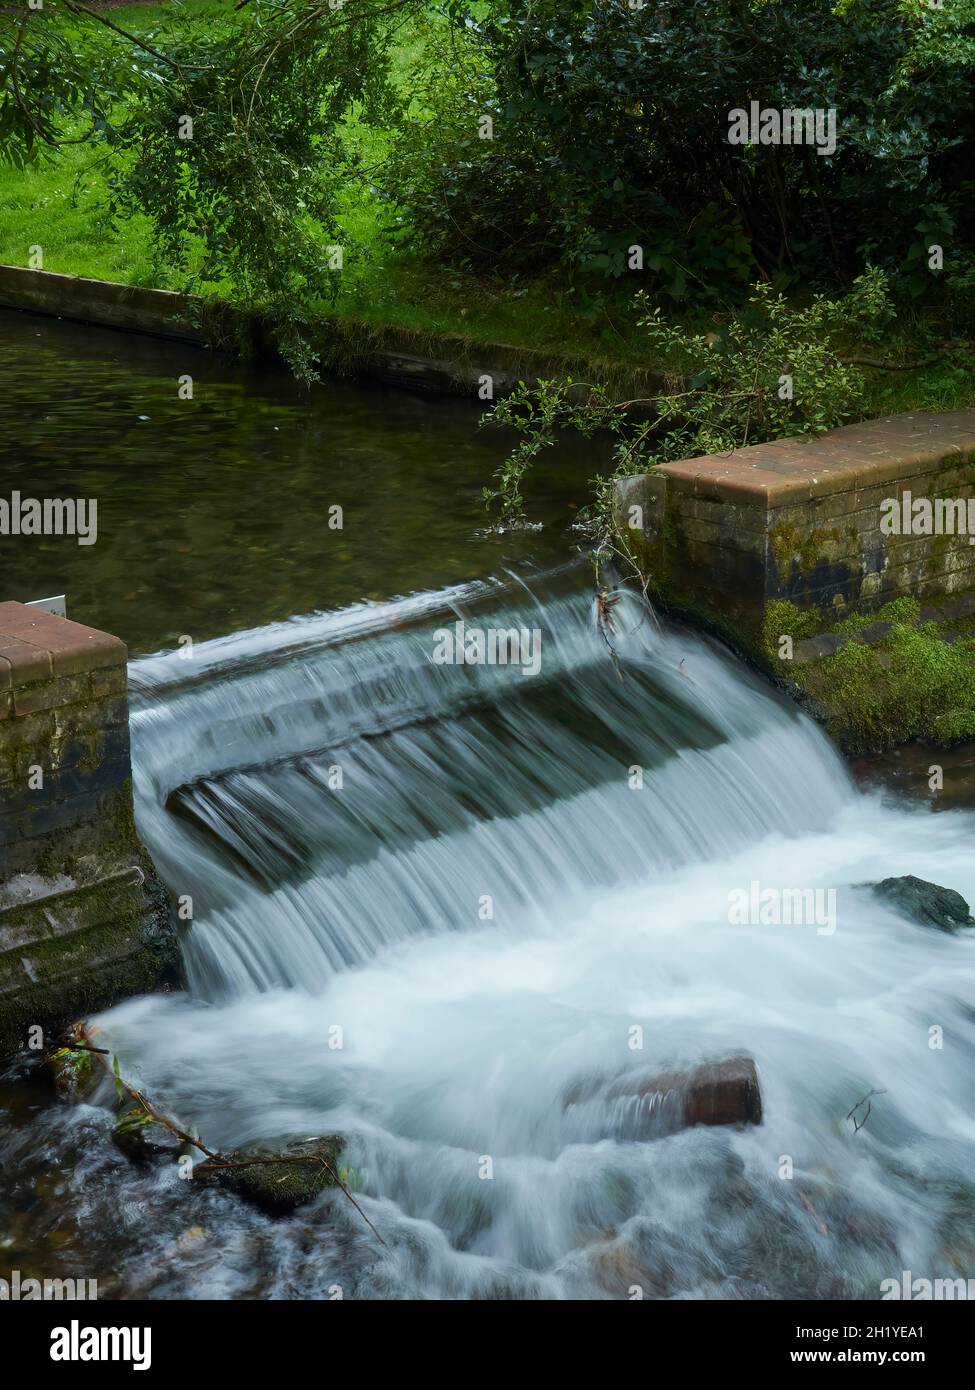 A small, tree surrounded, multi-tiered weir waterfall in a suburban park, taken using a slow shutter to captured the susurration of the falling water. Stock Photo